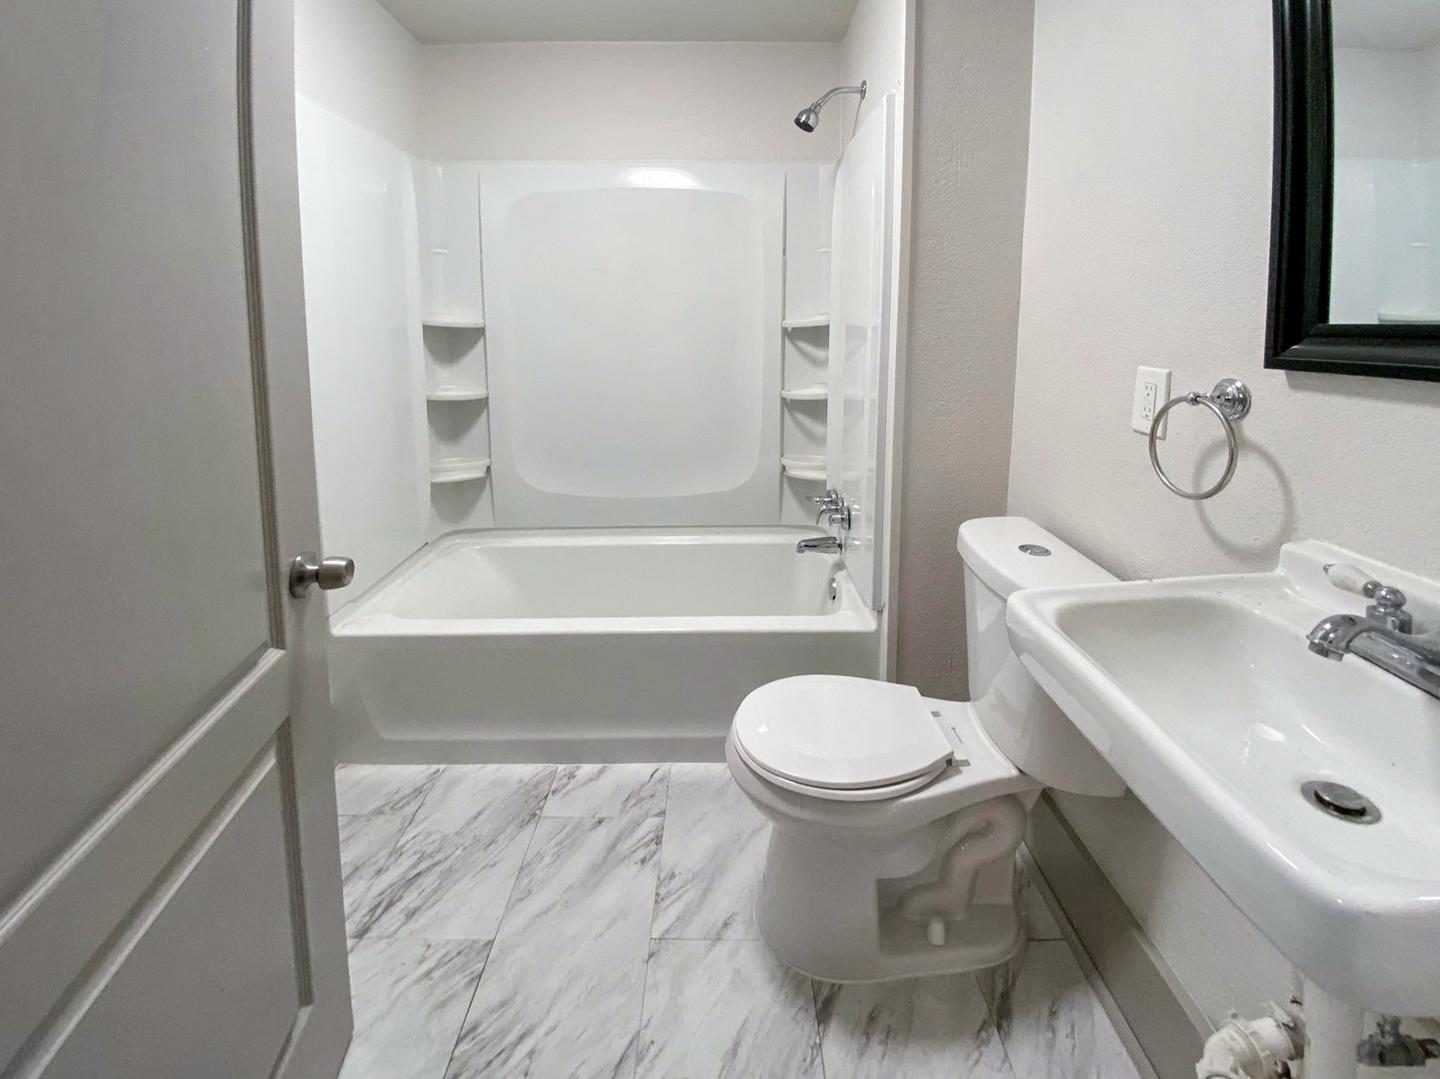 Fully updated with new plumbing, bathtub, shower, toilette and sink.